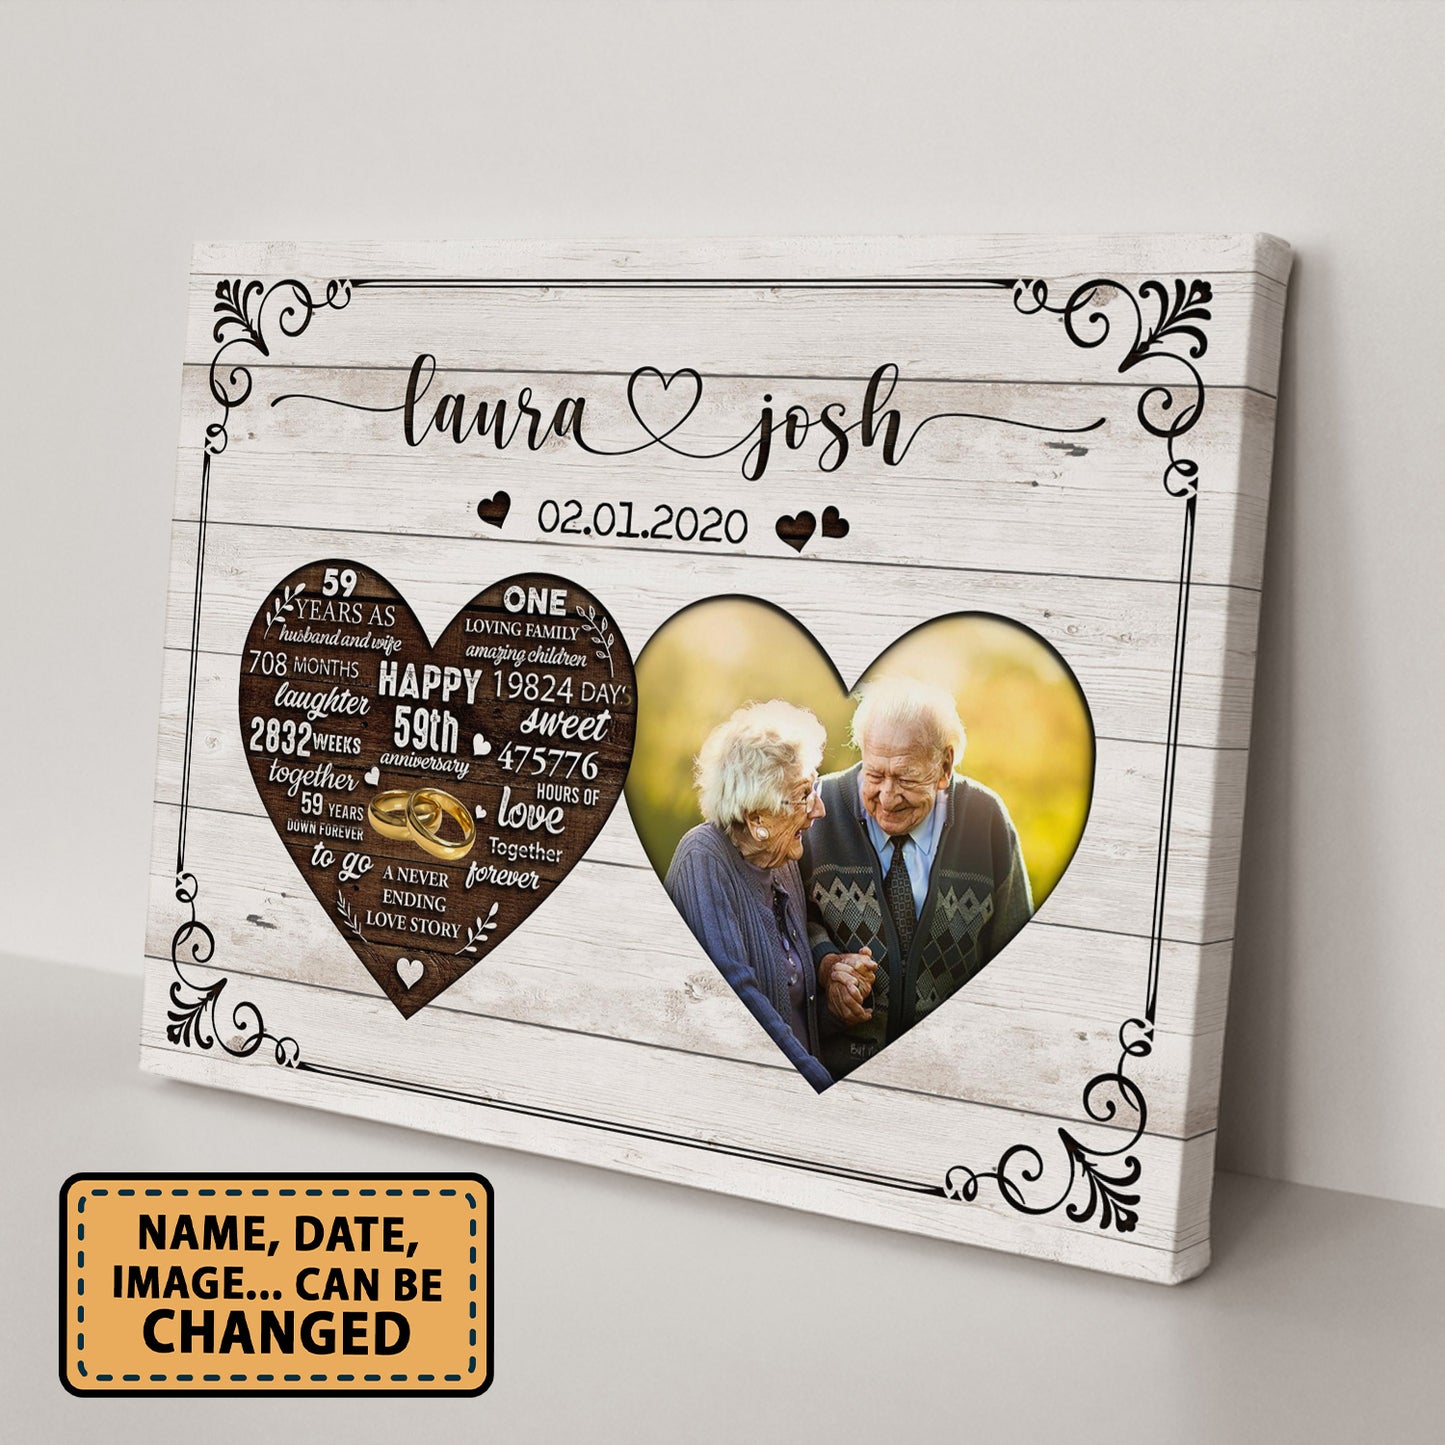 Happy 59th Anniversary As Husband And Wife Anniversary Canvas